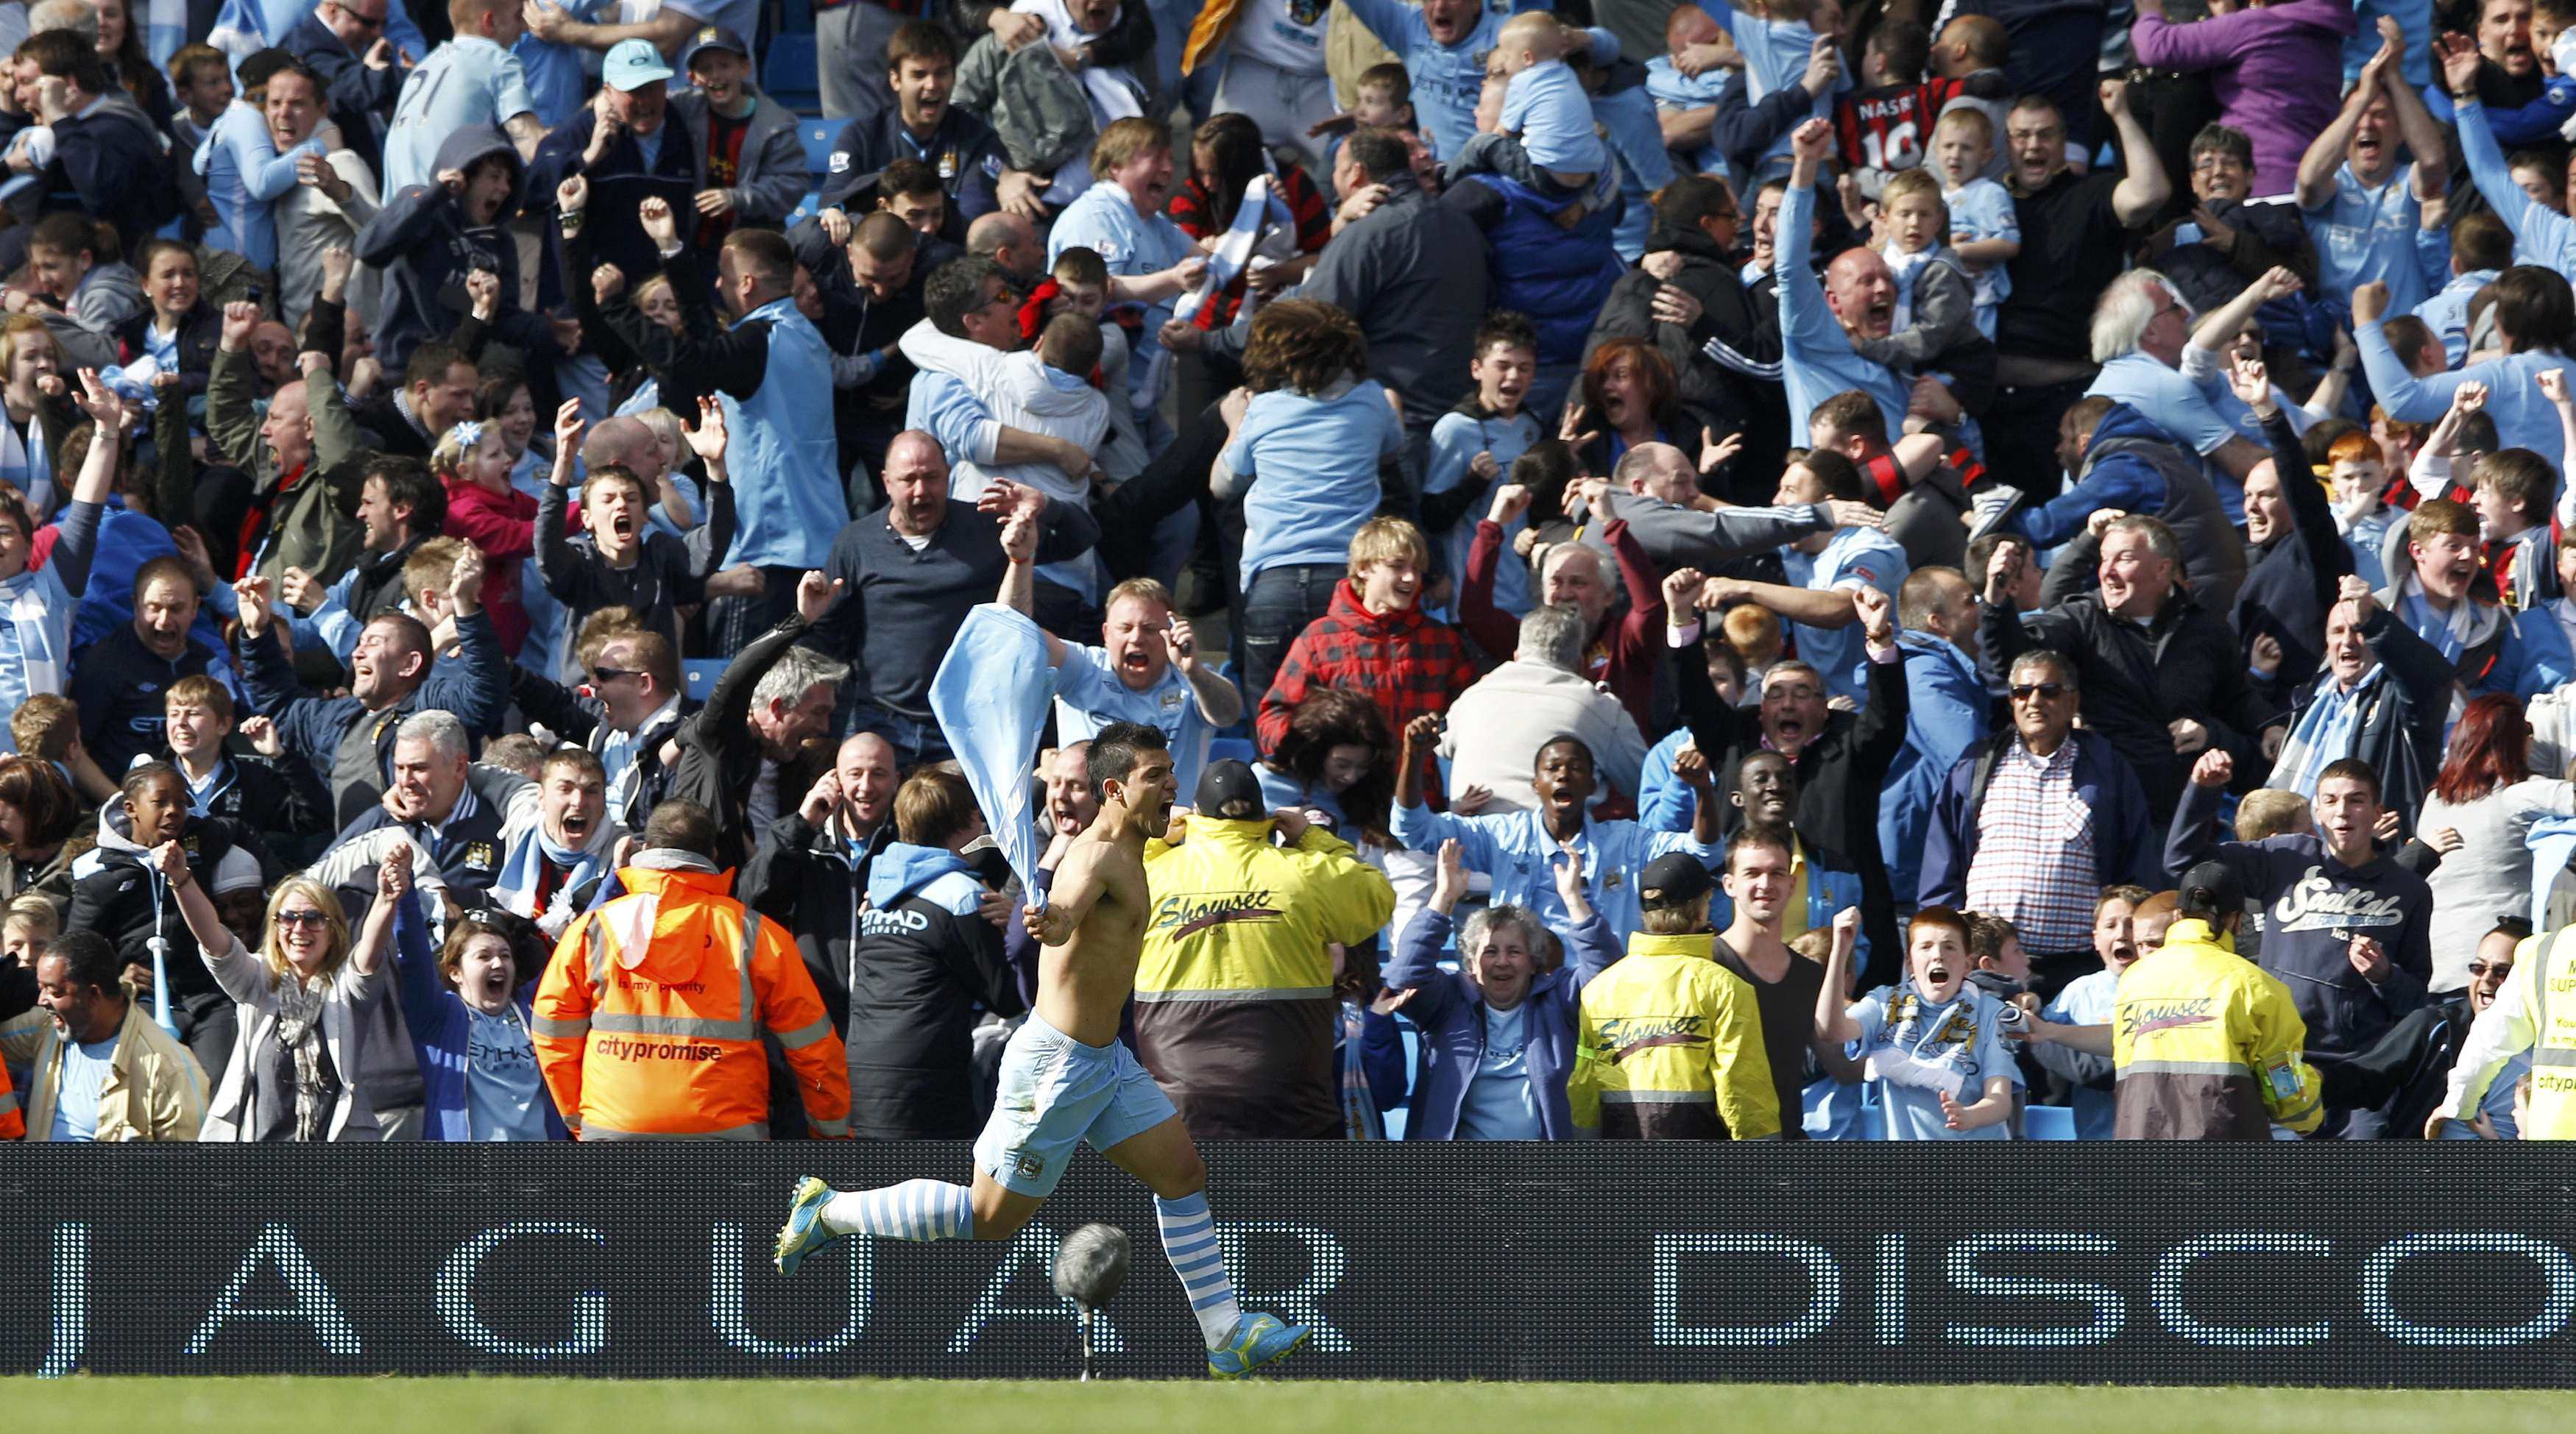 Sergio Aguero celebrates his goal that clinched the title for Manchester City on the final day in 2012. Photo: Reuters